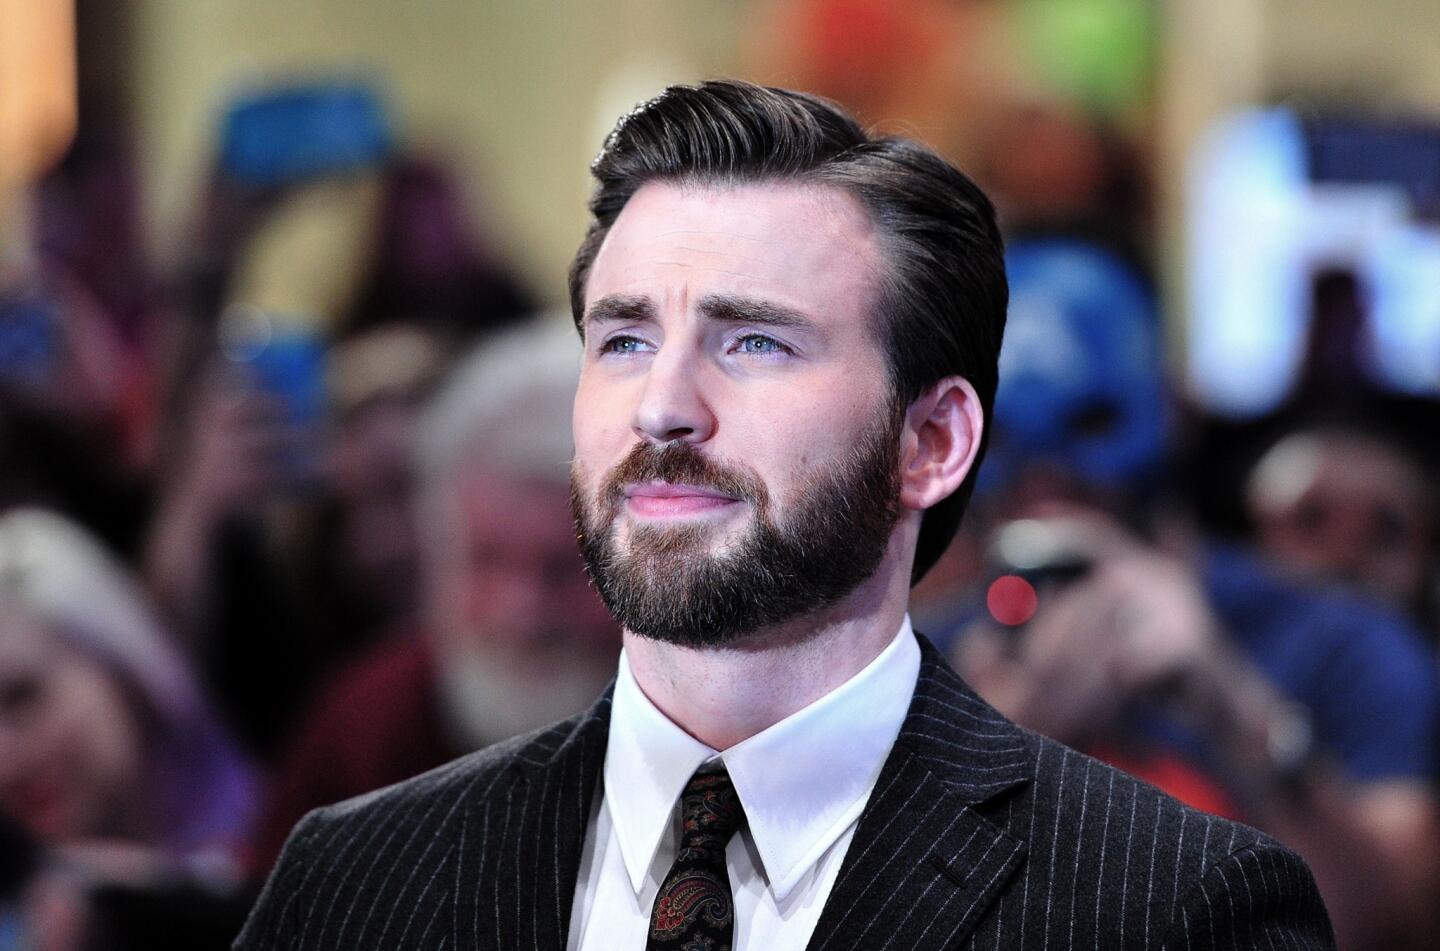 Captain America will be Chris Evans' last gig as an actor